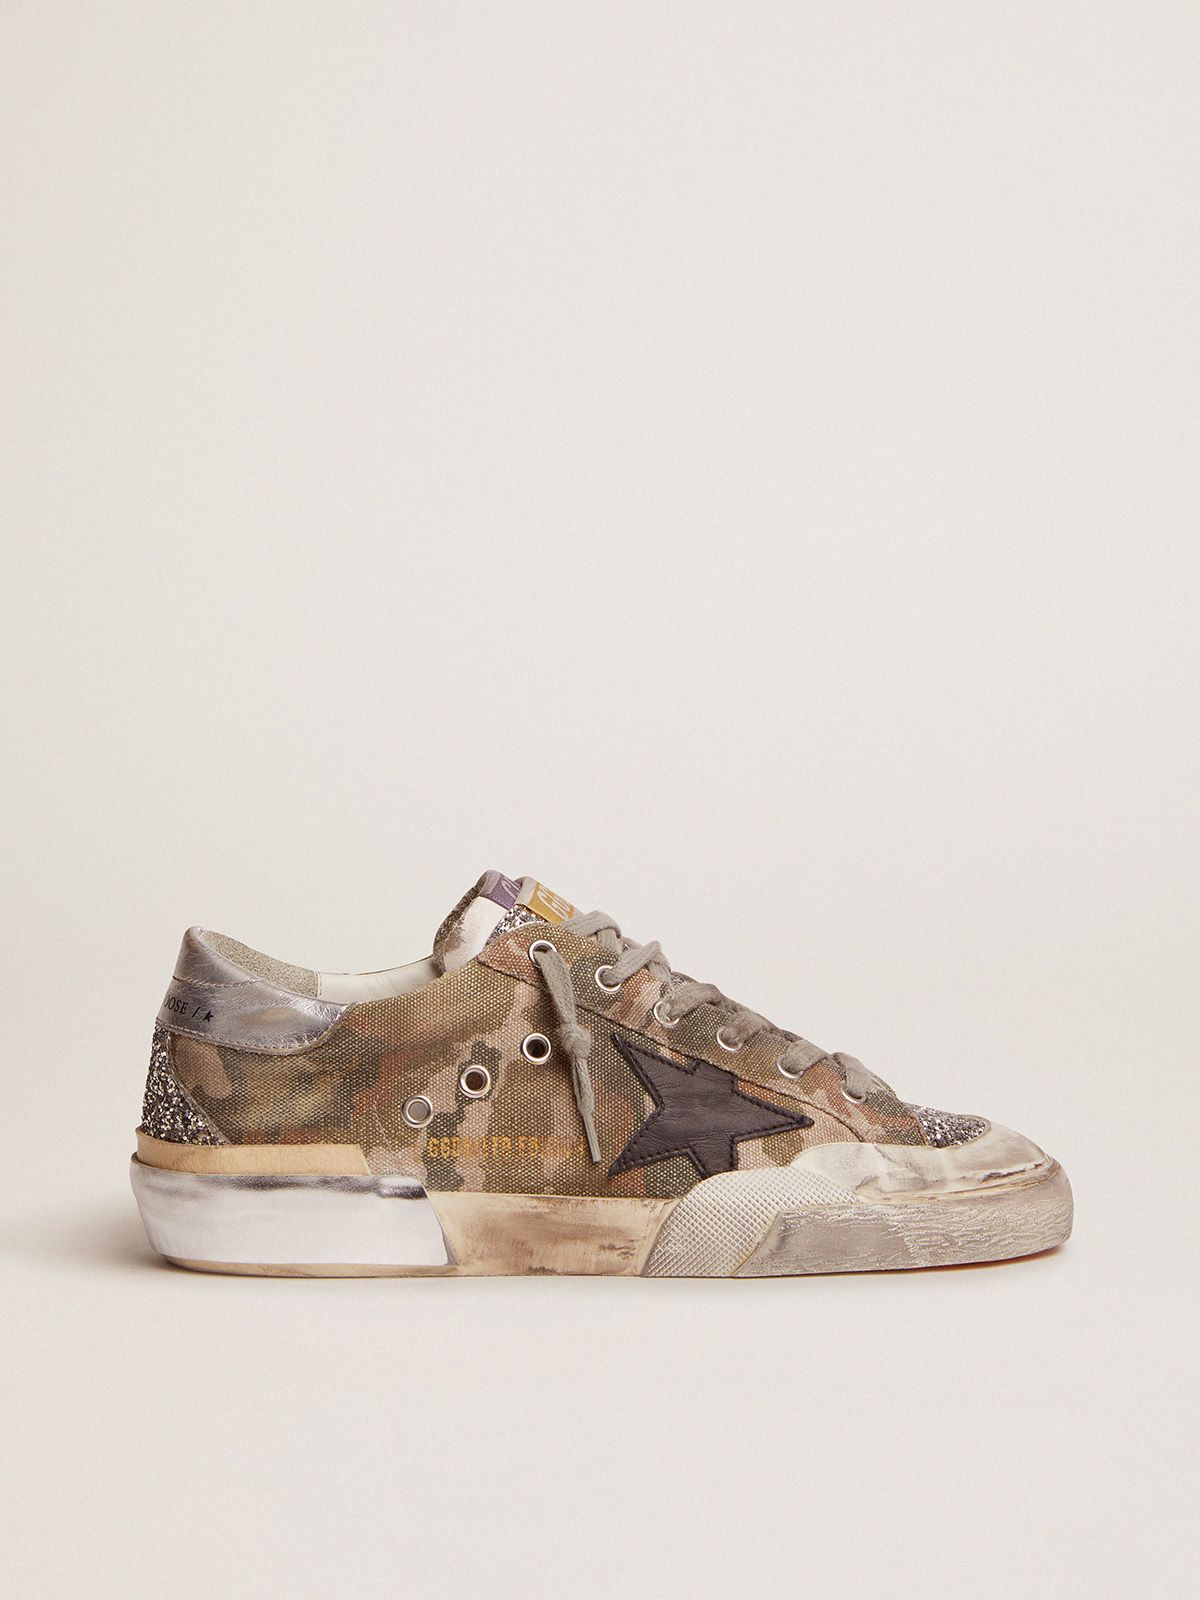 golden goose camouflage LAB in canvas multi-foxing Penstar Super-Star with sneakers